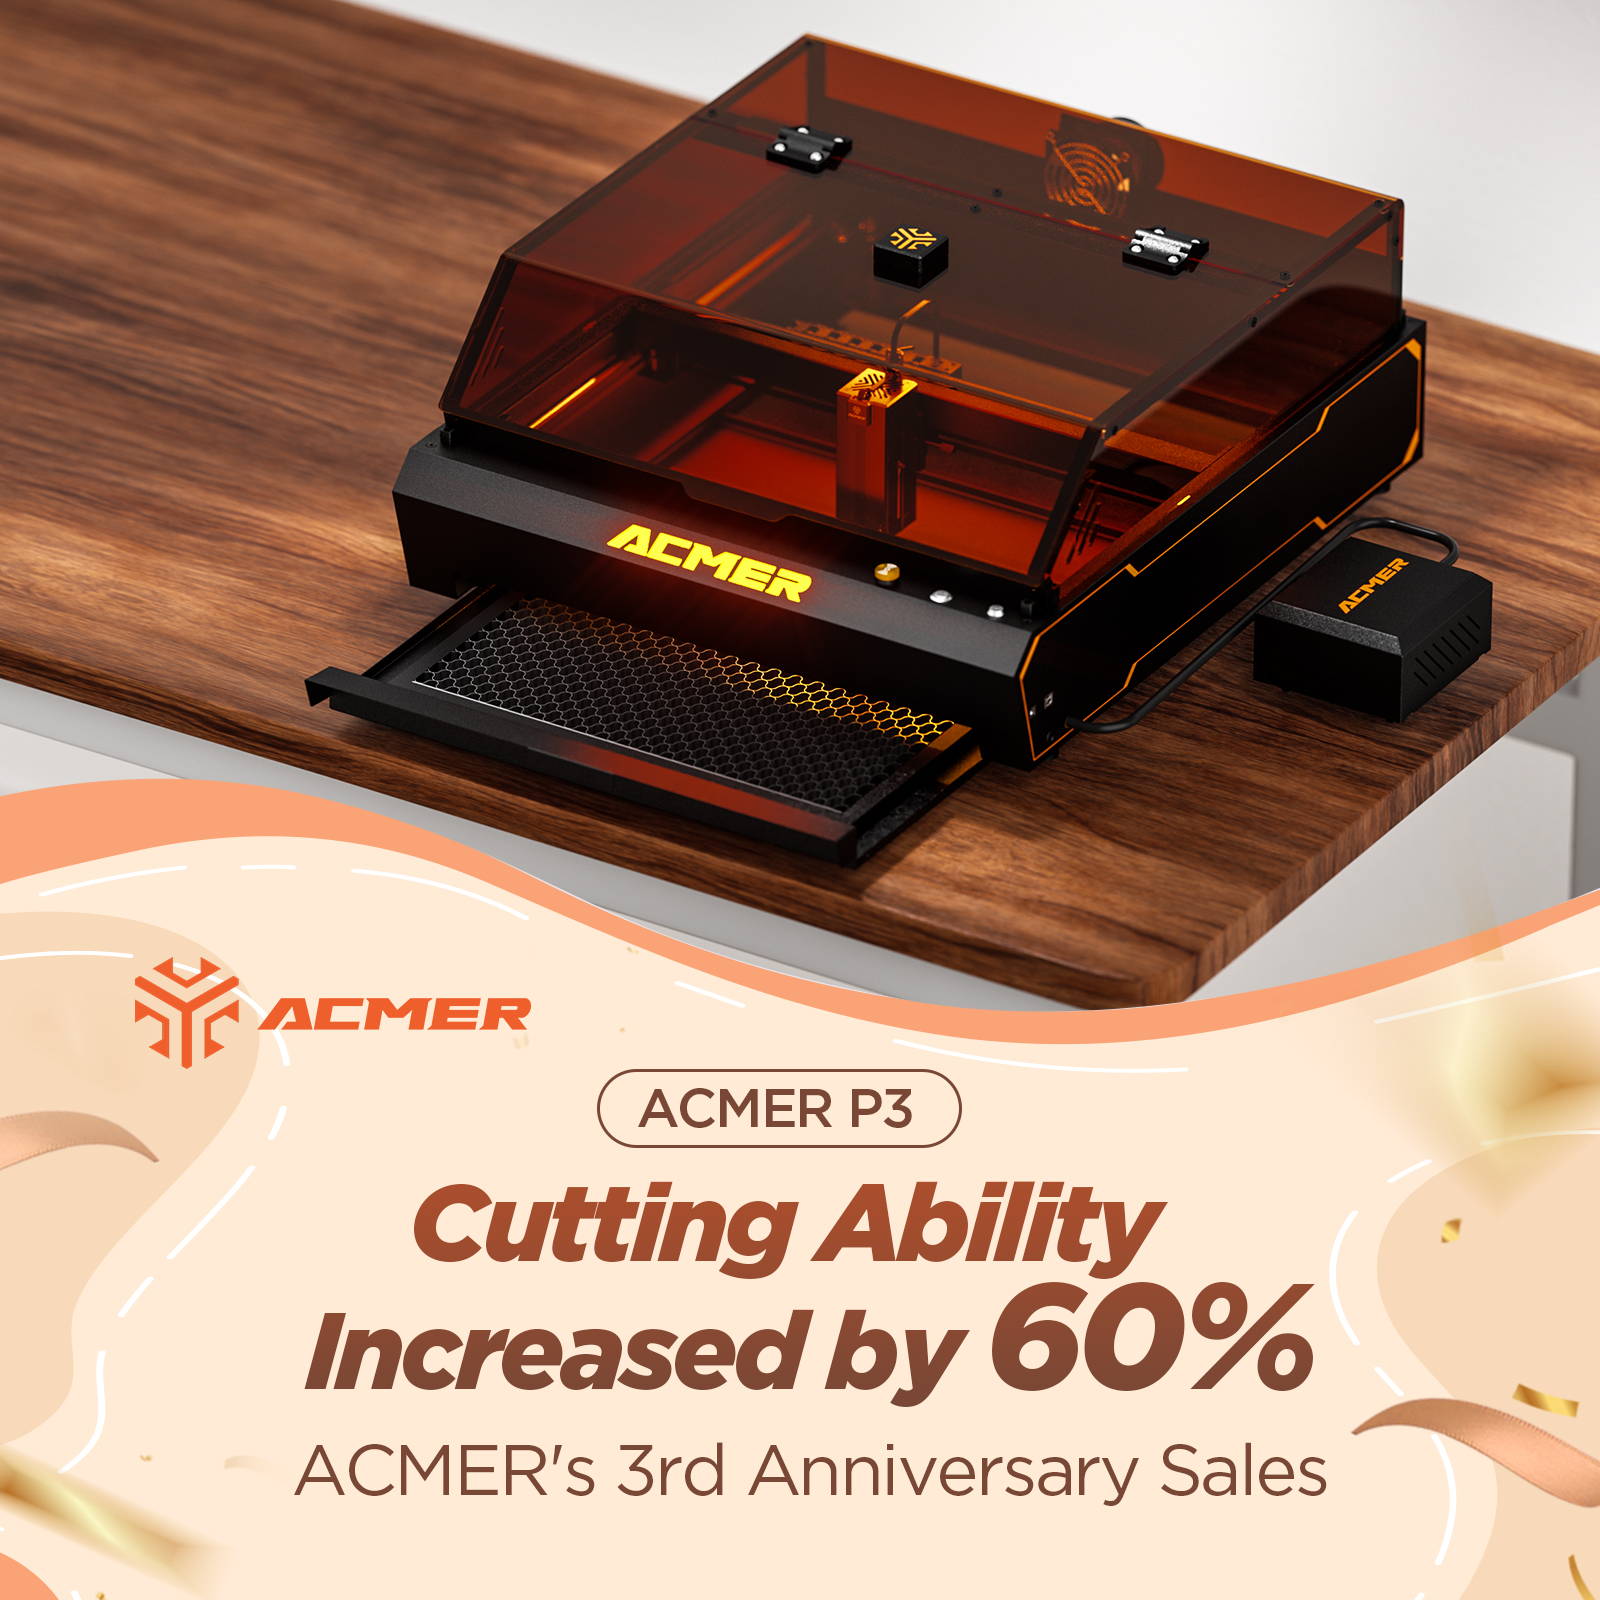 World's First Enclosed Dual Laser Engraver ACMER P3 will be Released Soon